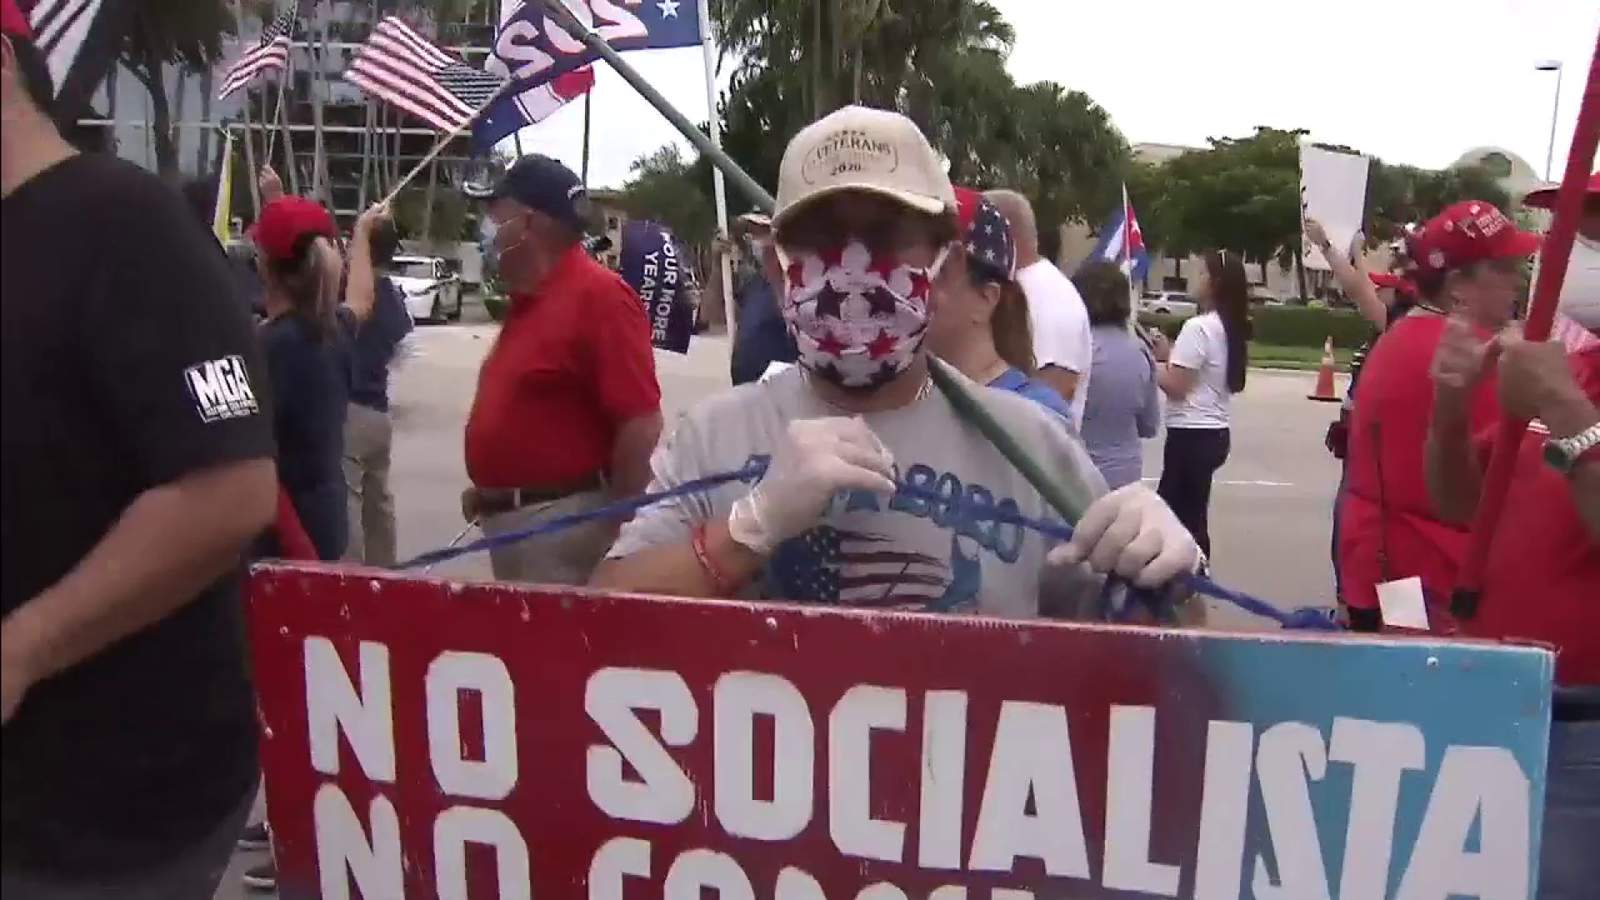 Conservative groups rally in Miami Lakes to have their voices heard